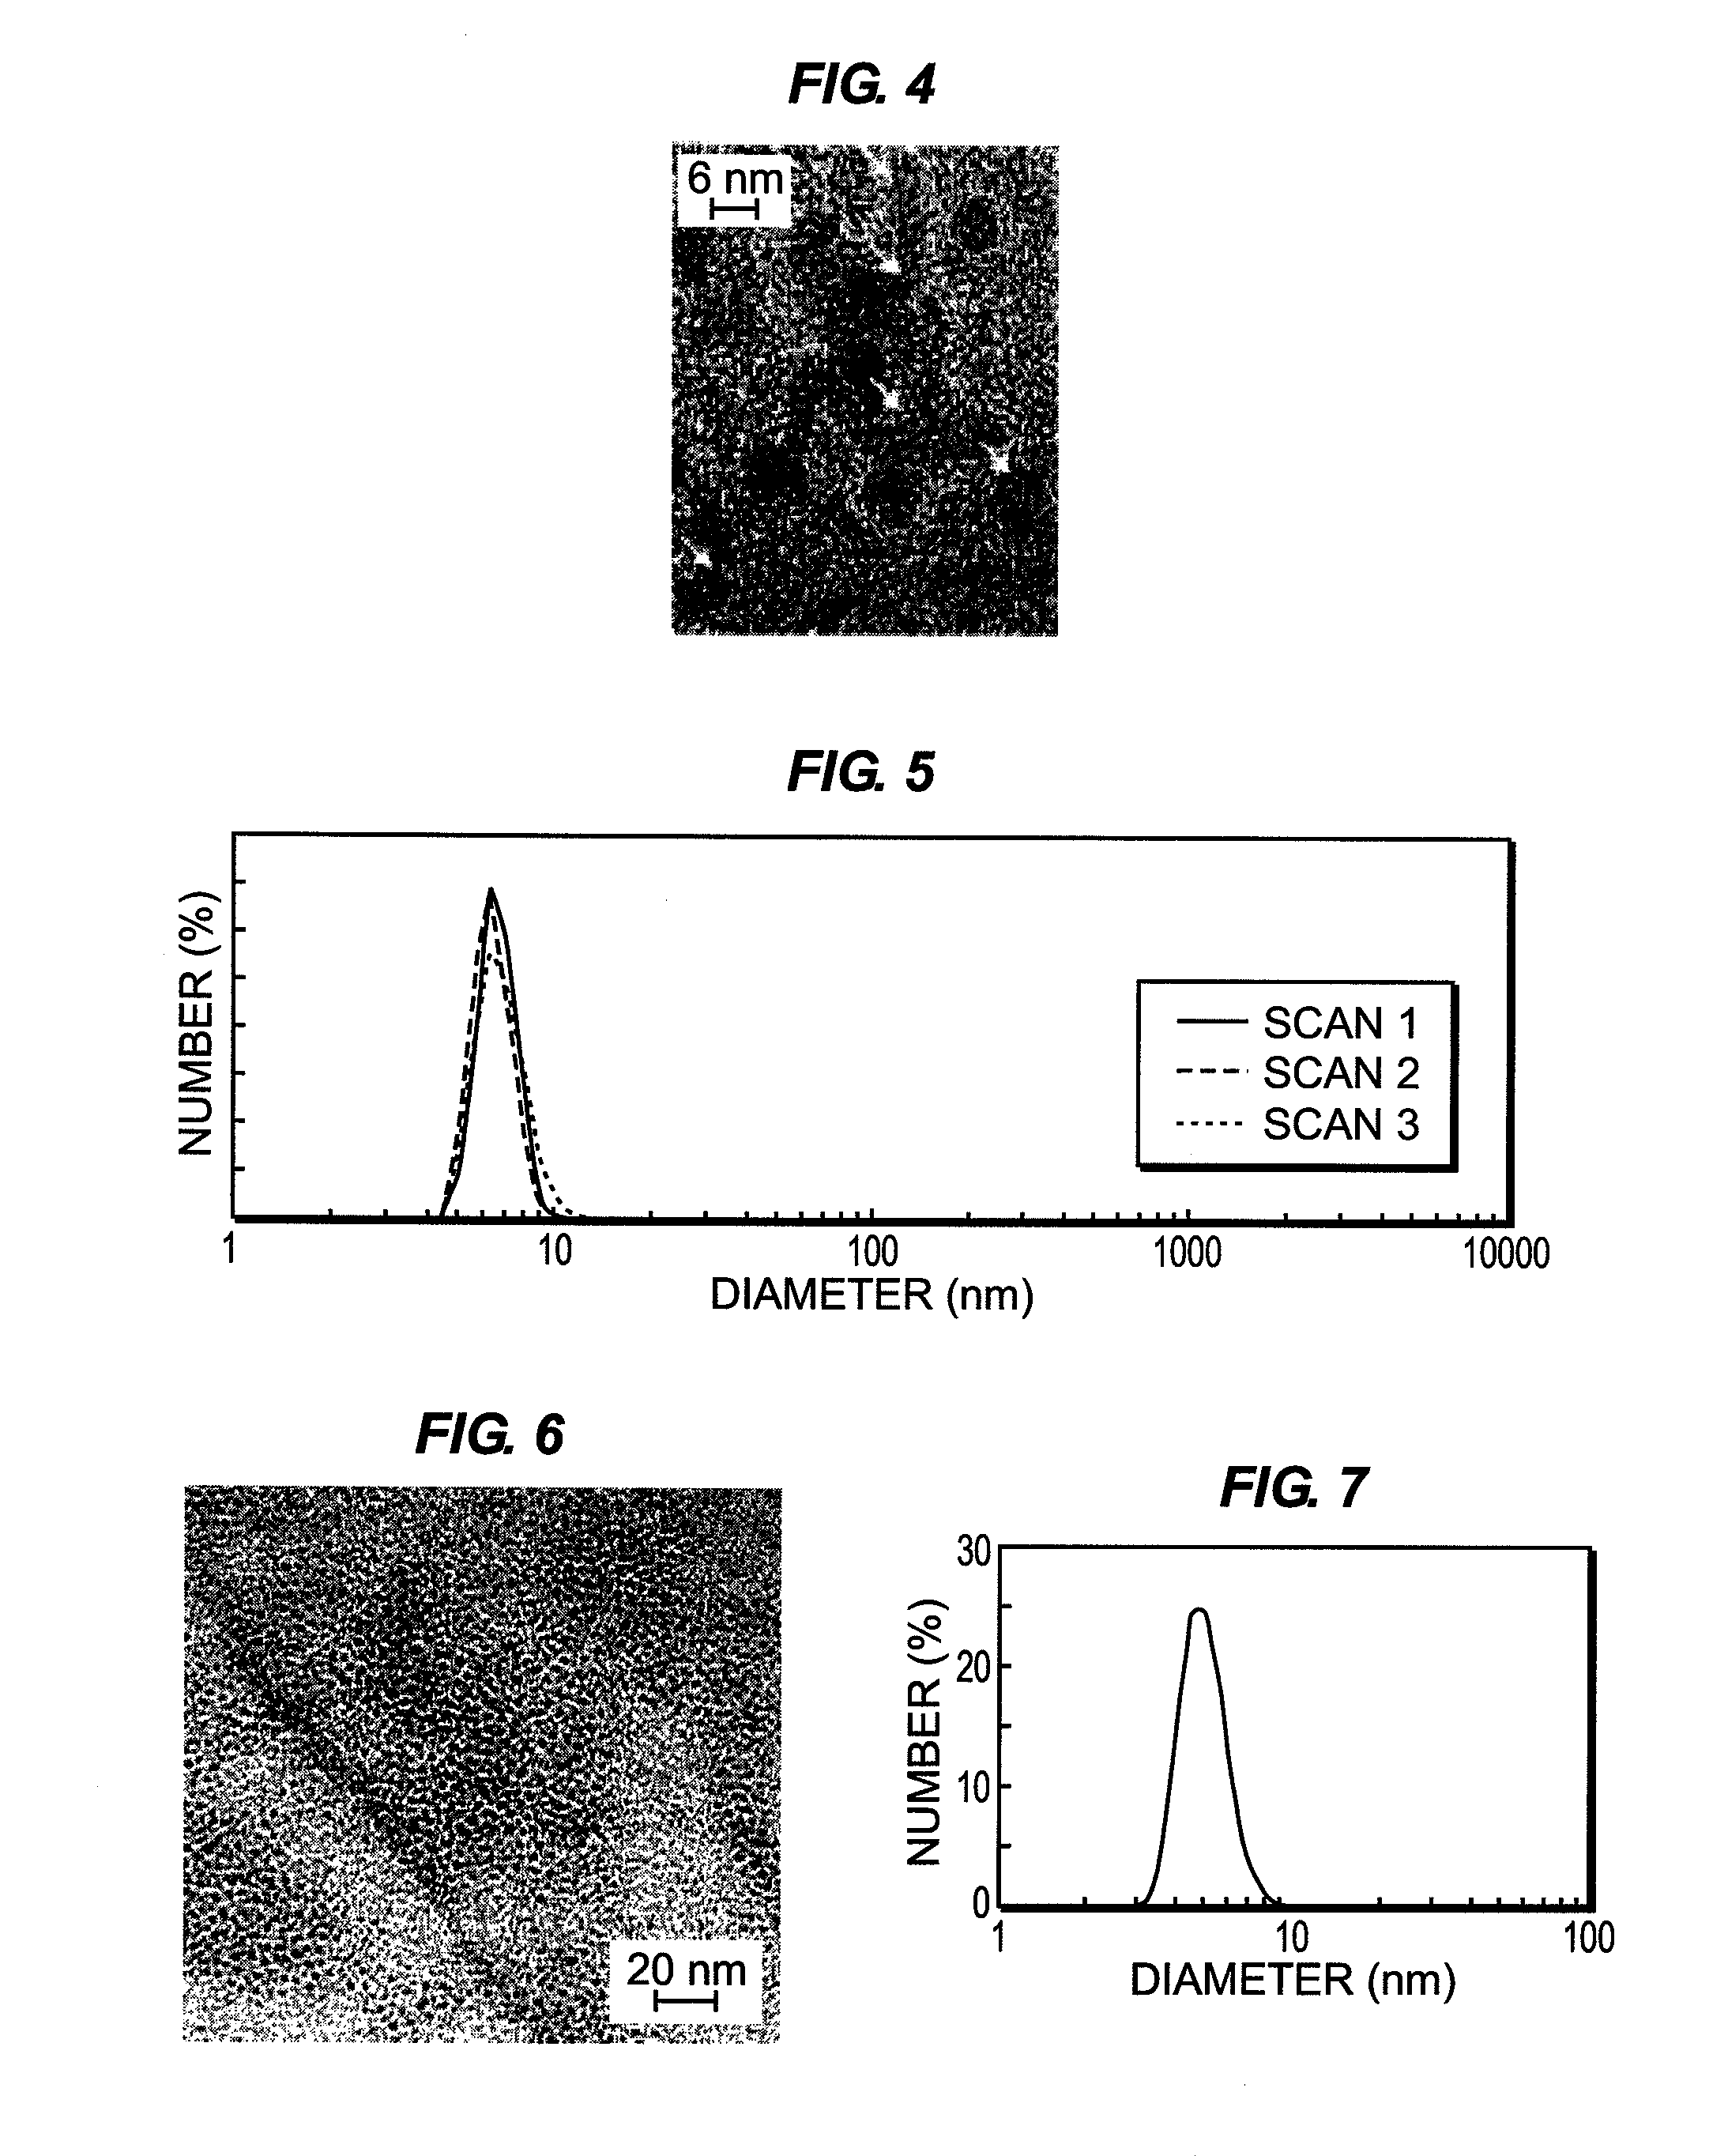 Nanoparticle-based imaging agents for x-ray / computed tomography and methods for making same